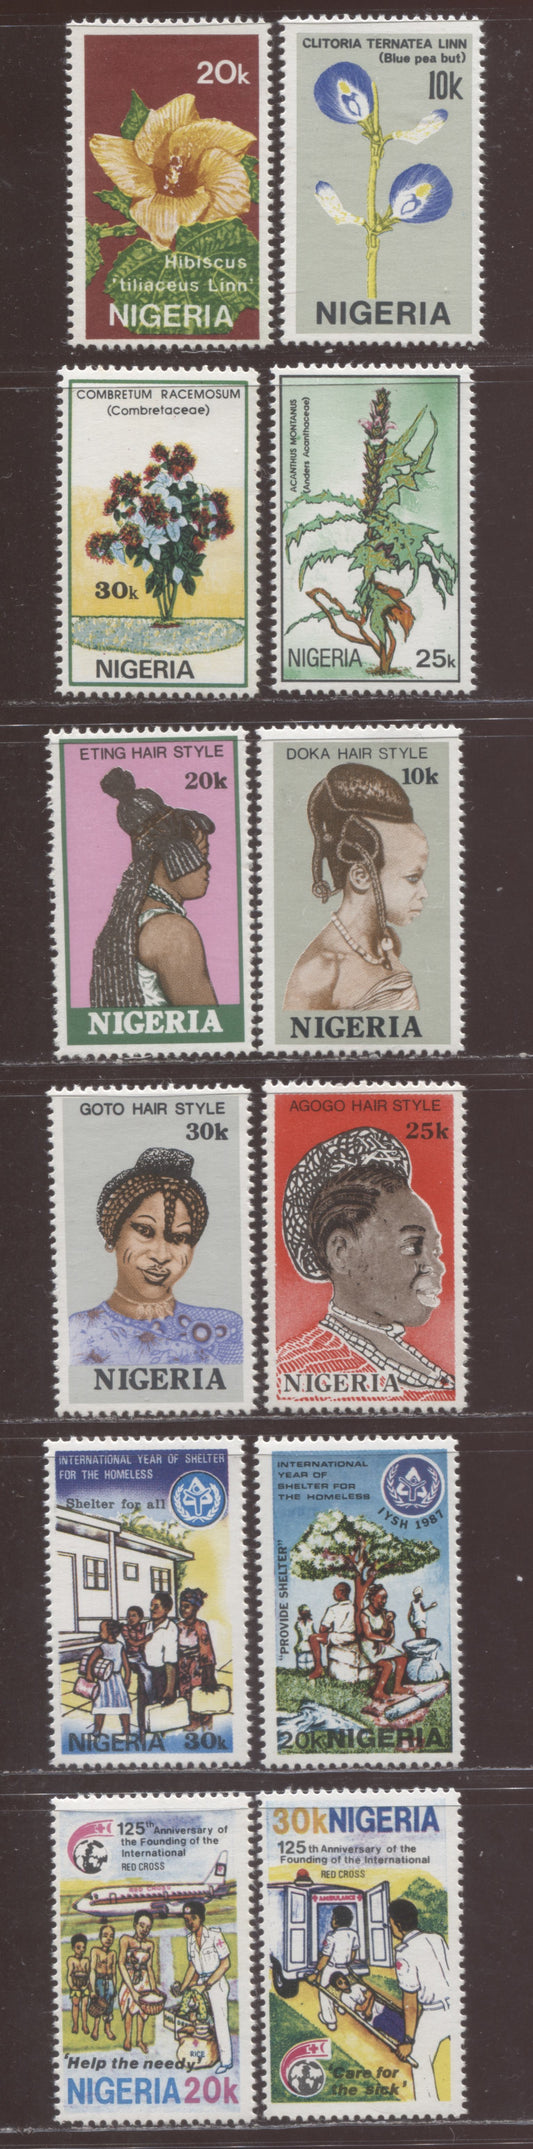 Nigeria SC#517-528 1987-1988 Flowers - Red Cross Issues, 12 VFNH Singles, Click on Listing to See ALL Pictures, 2017 Scott Cat. $4.5 USD